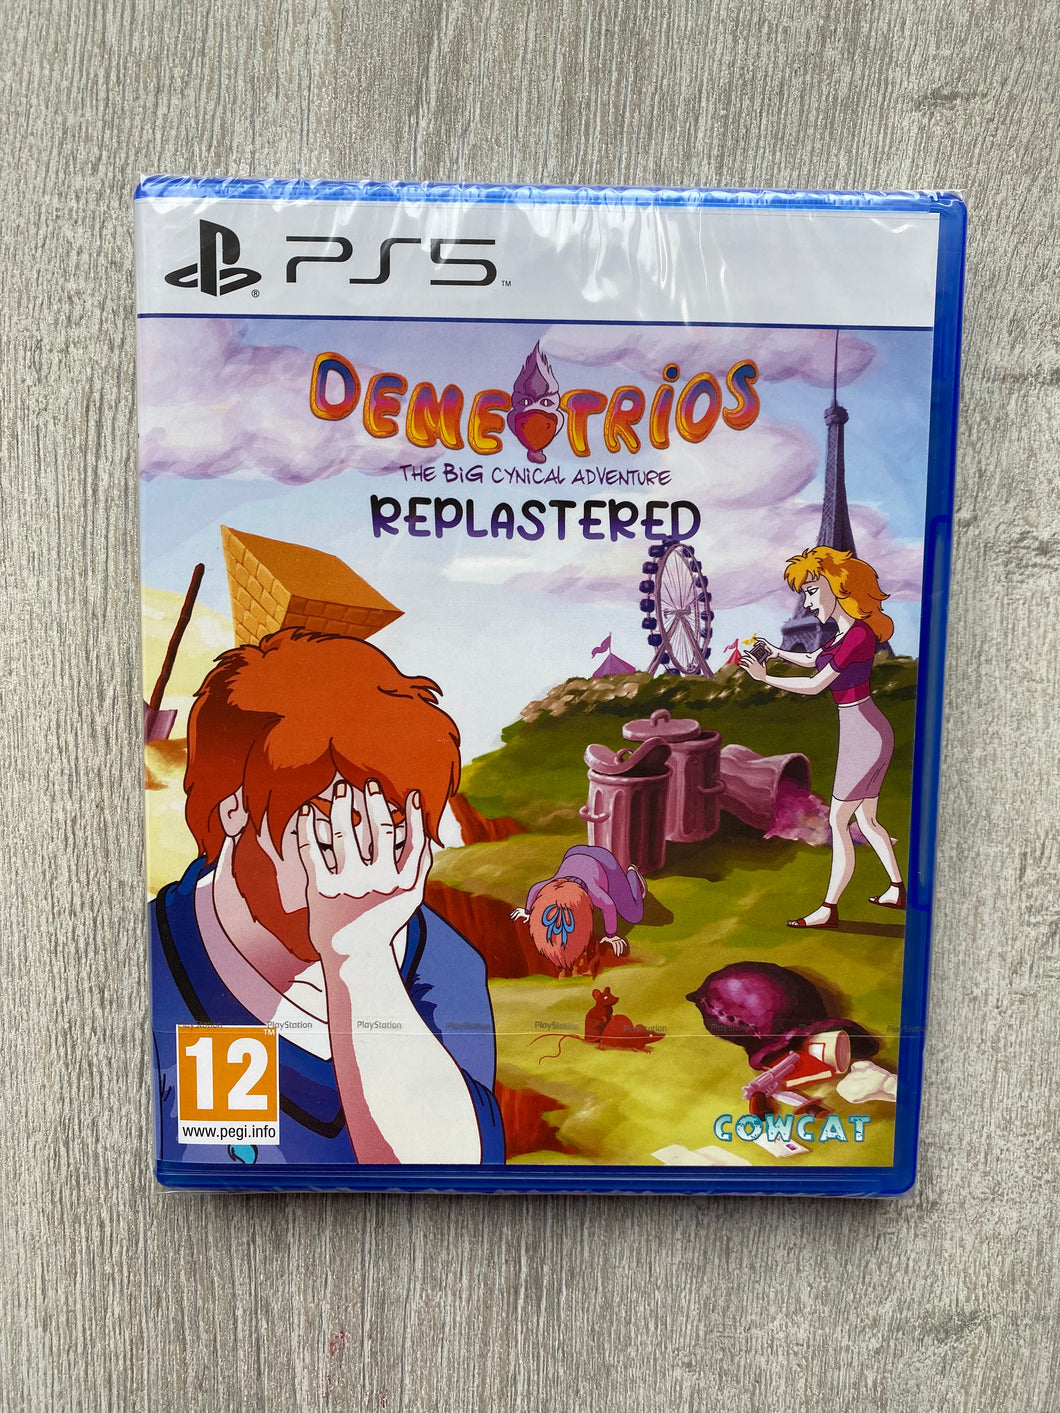 Demetrios the big cynical adventure replastered / Red art games / Ps5 / 999 copies